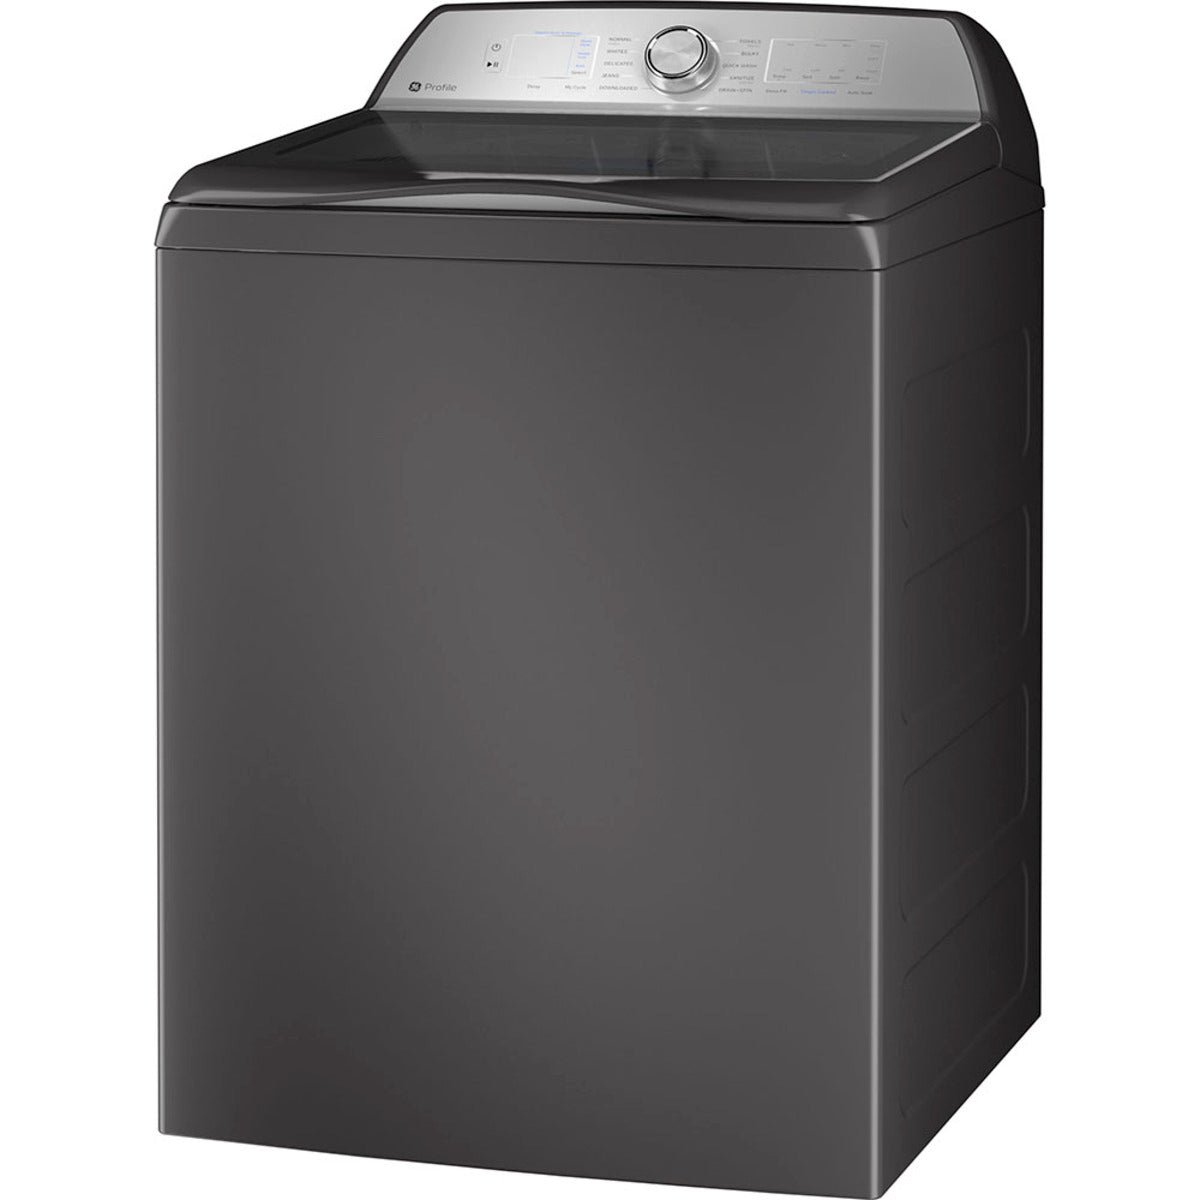 GE Profile - 5.8 cu. Ft  Top Load Washer in Grey - PTW600BPRDG